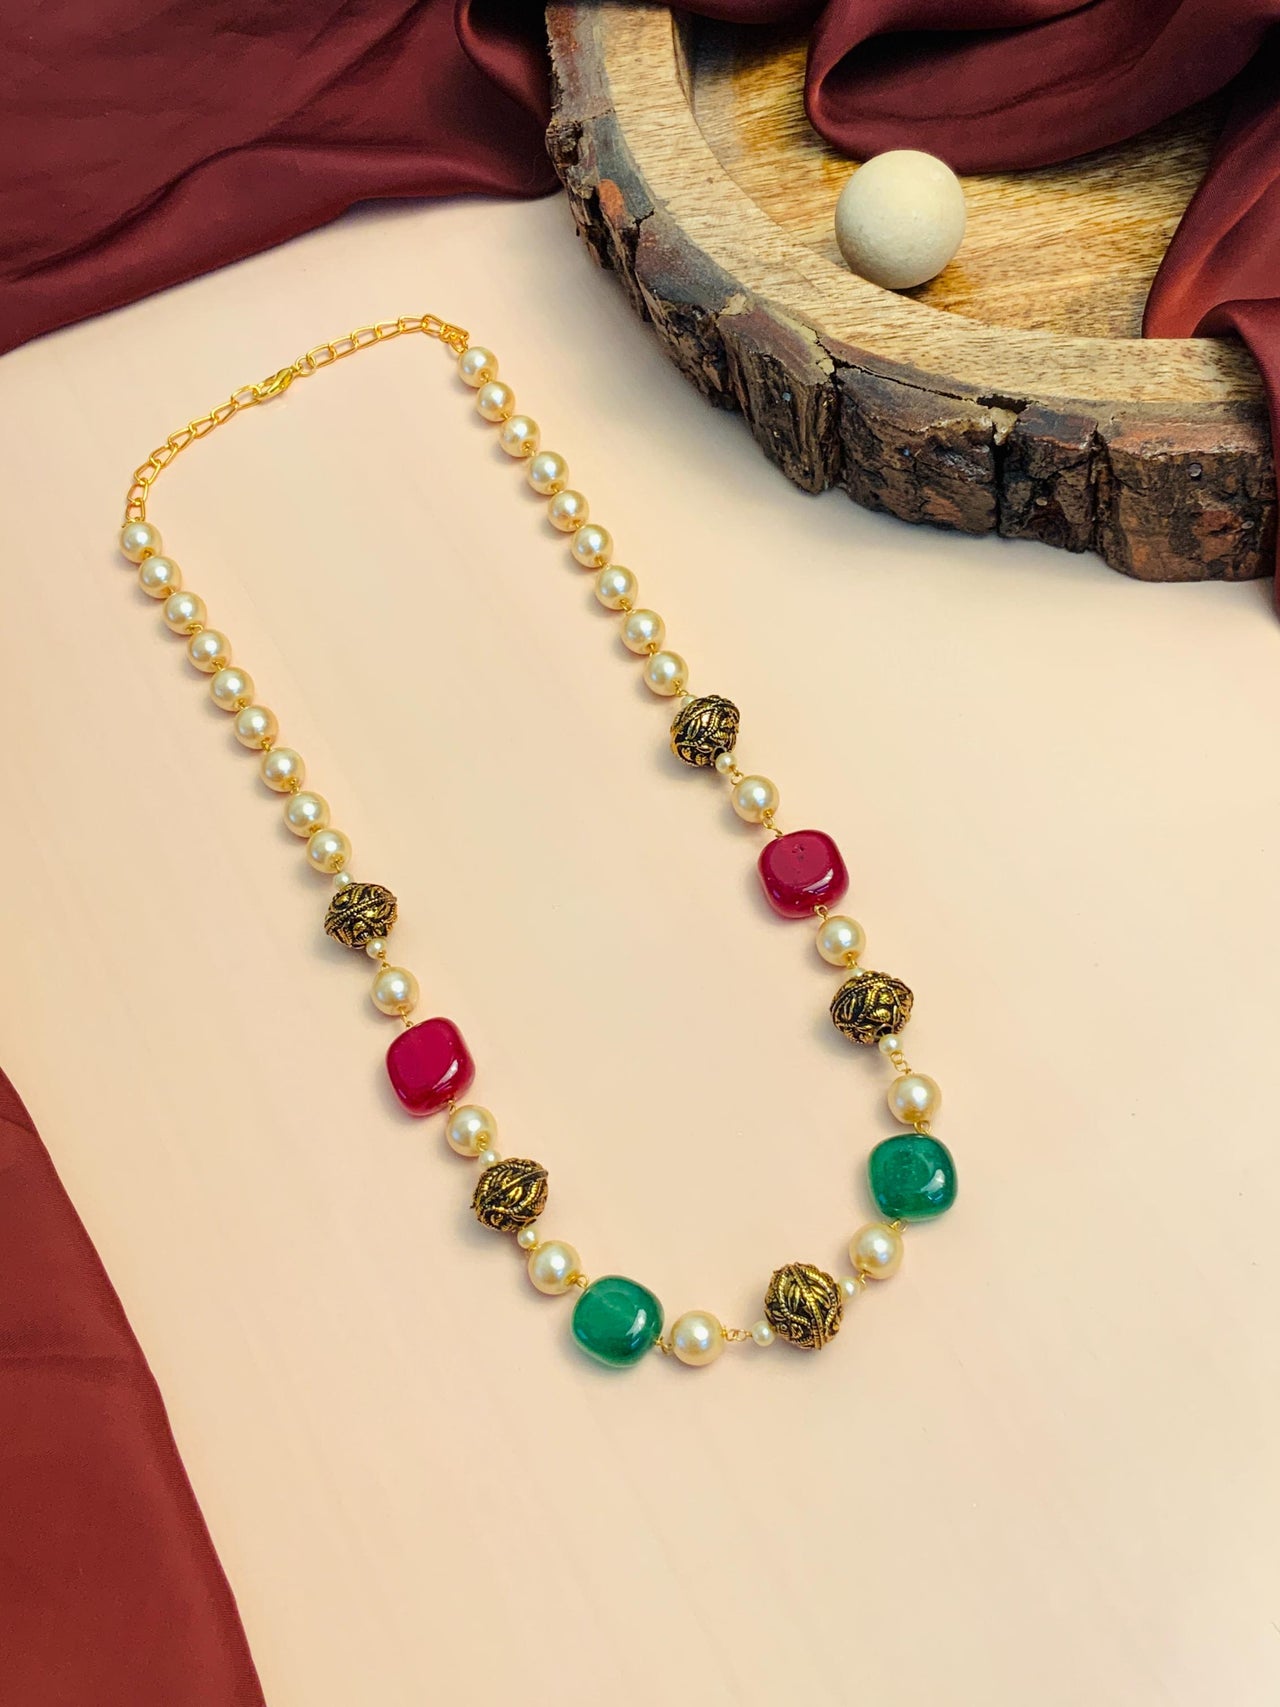 Charming High Quality Natural Stones and Pearl Mala - Abdesignsjewellery